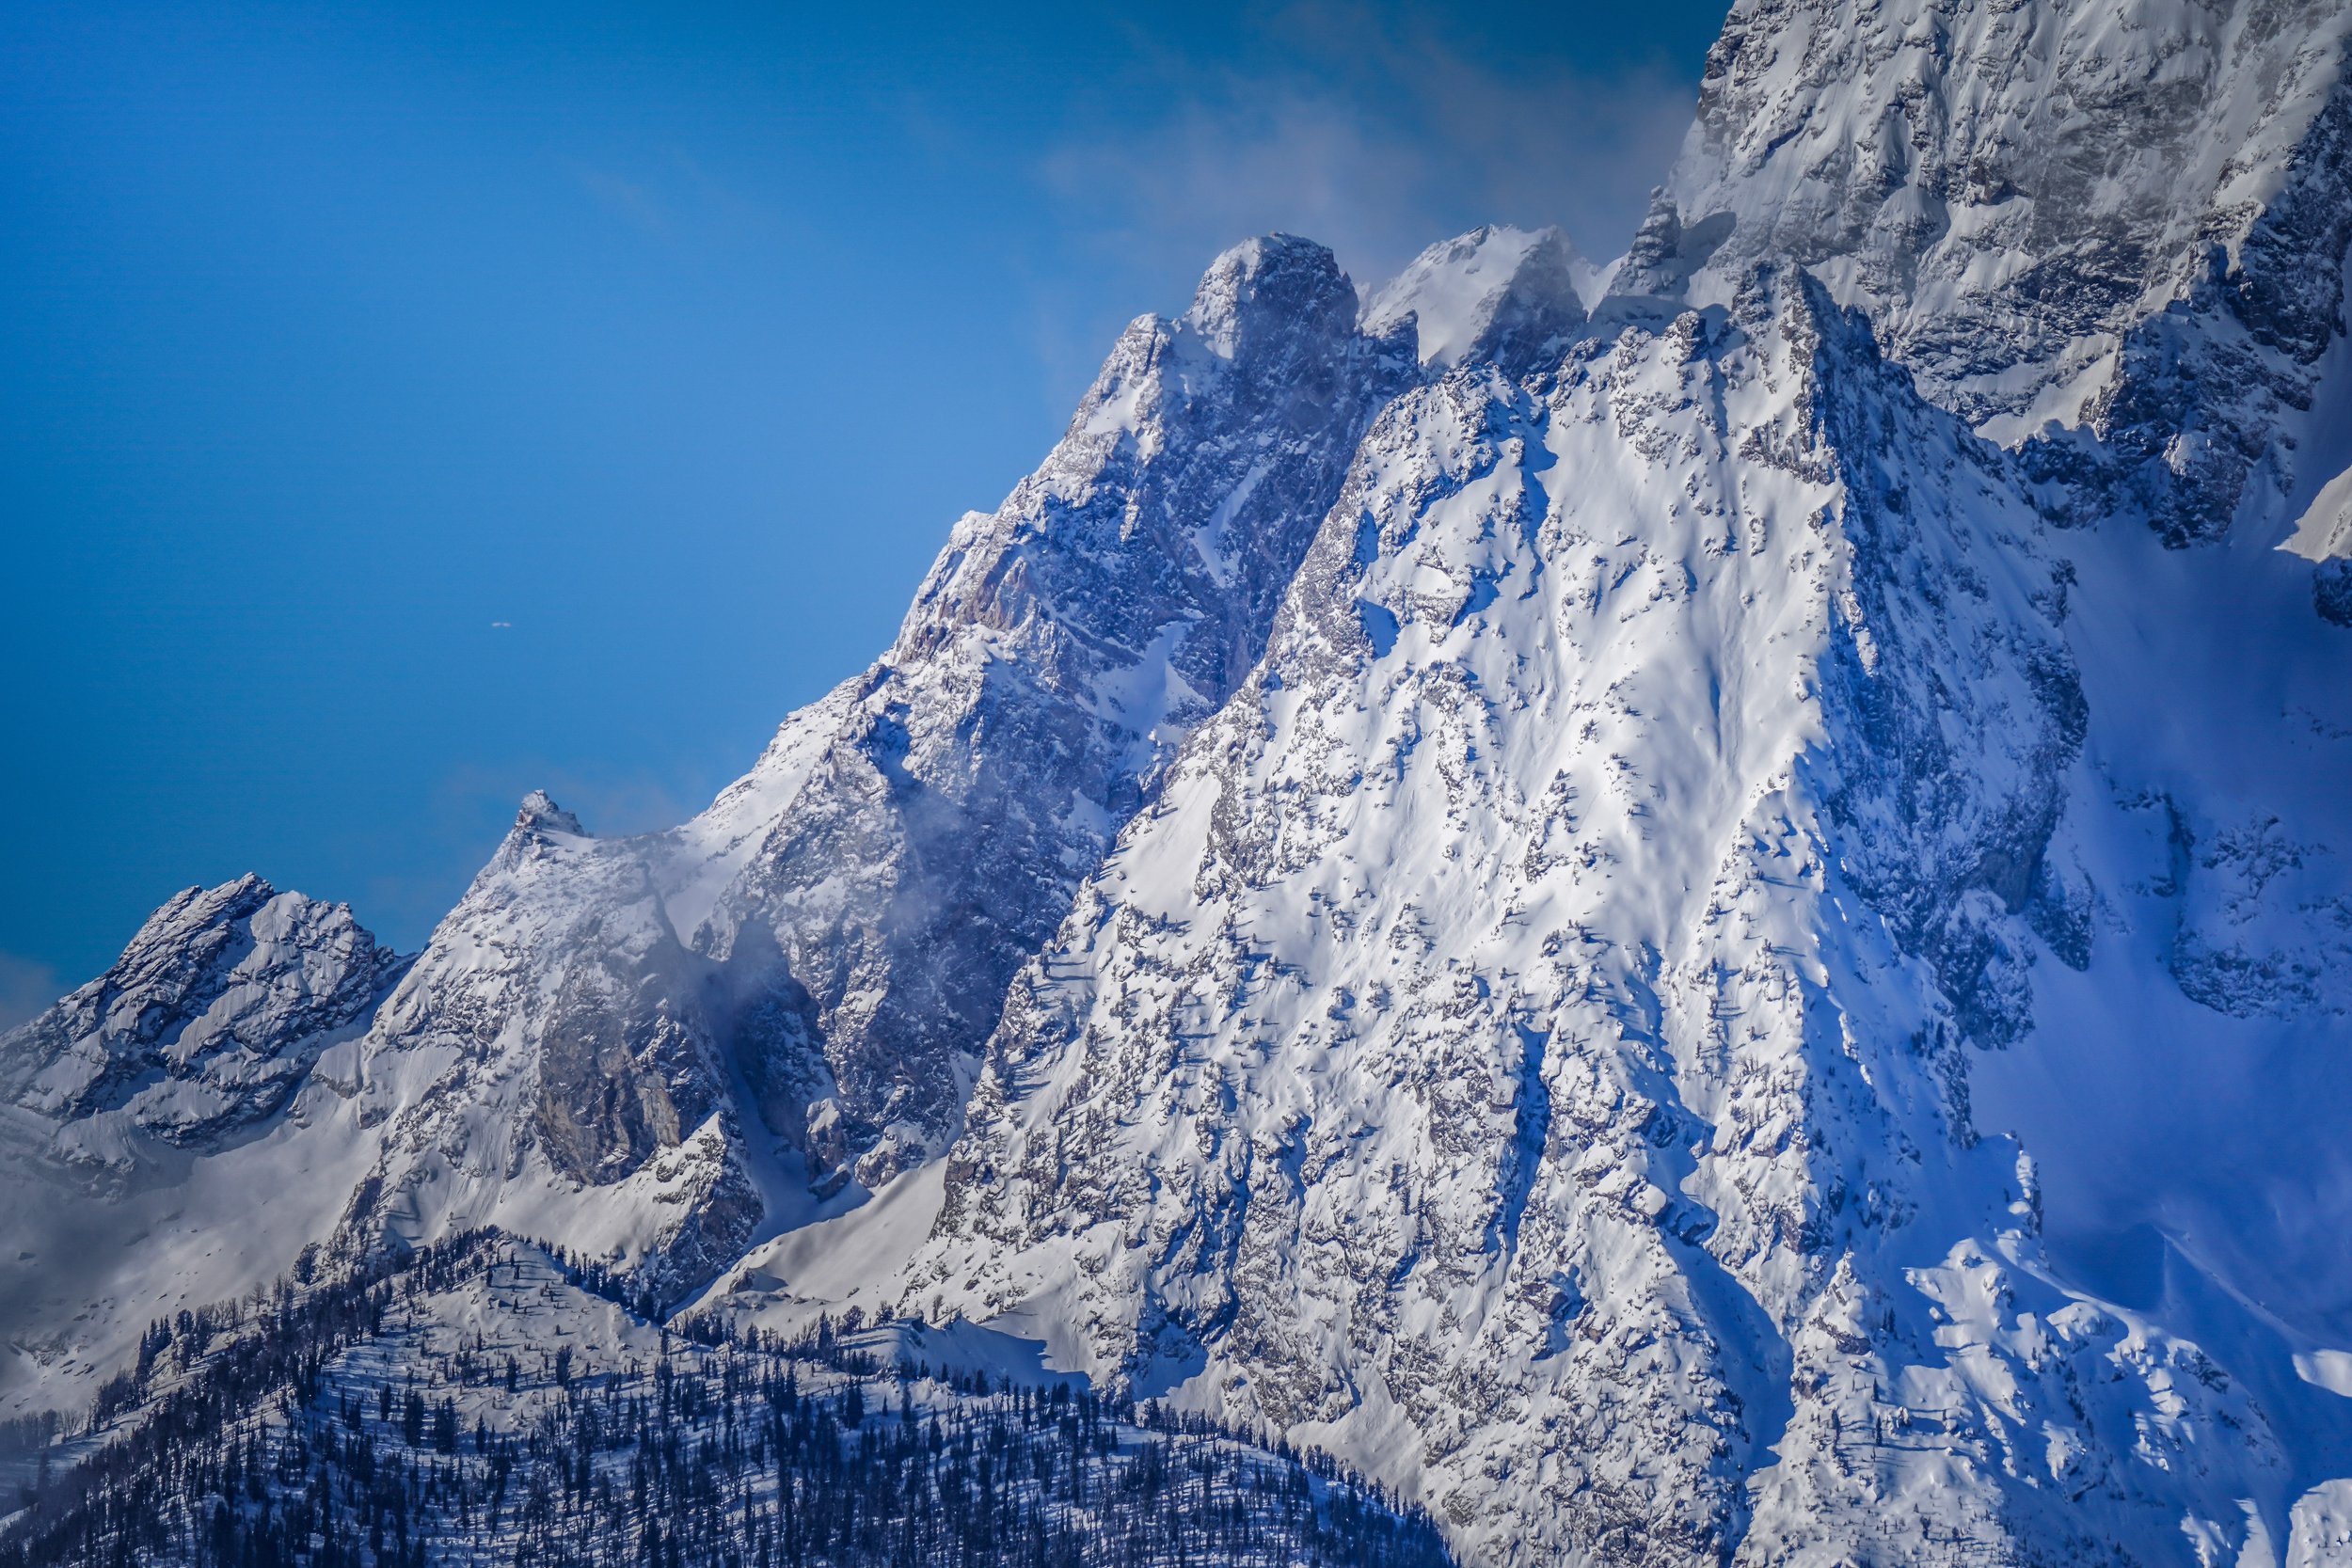 Close up of part of the Tetons